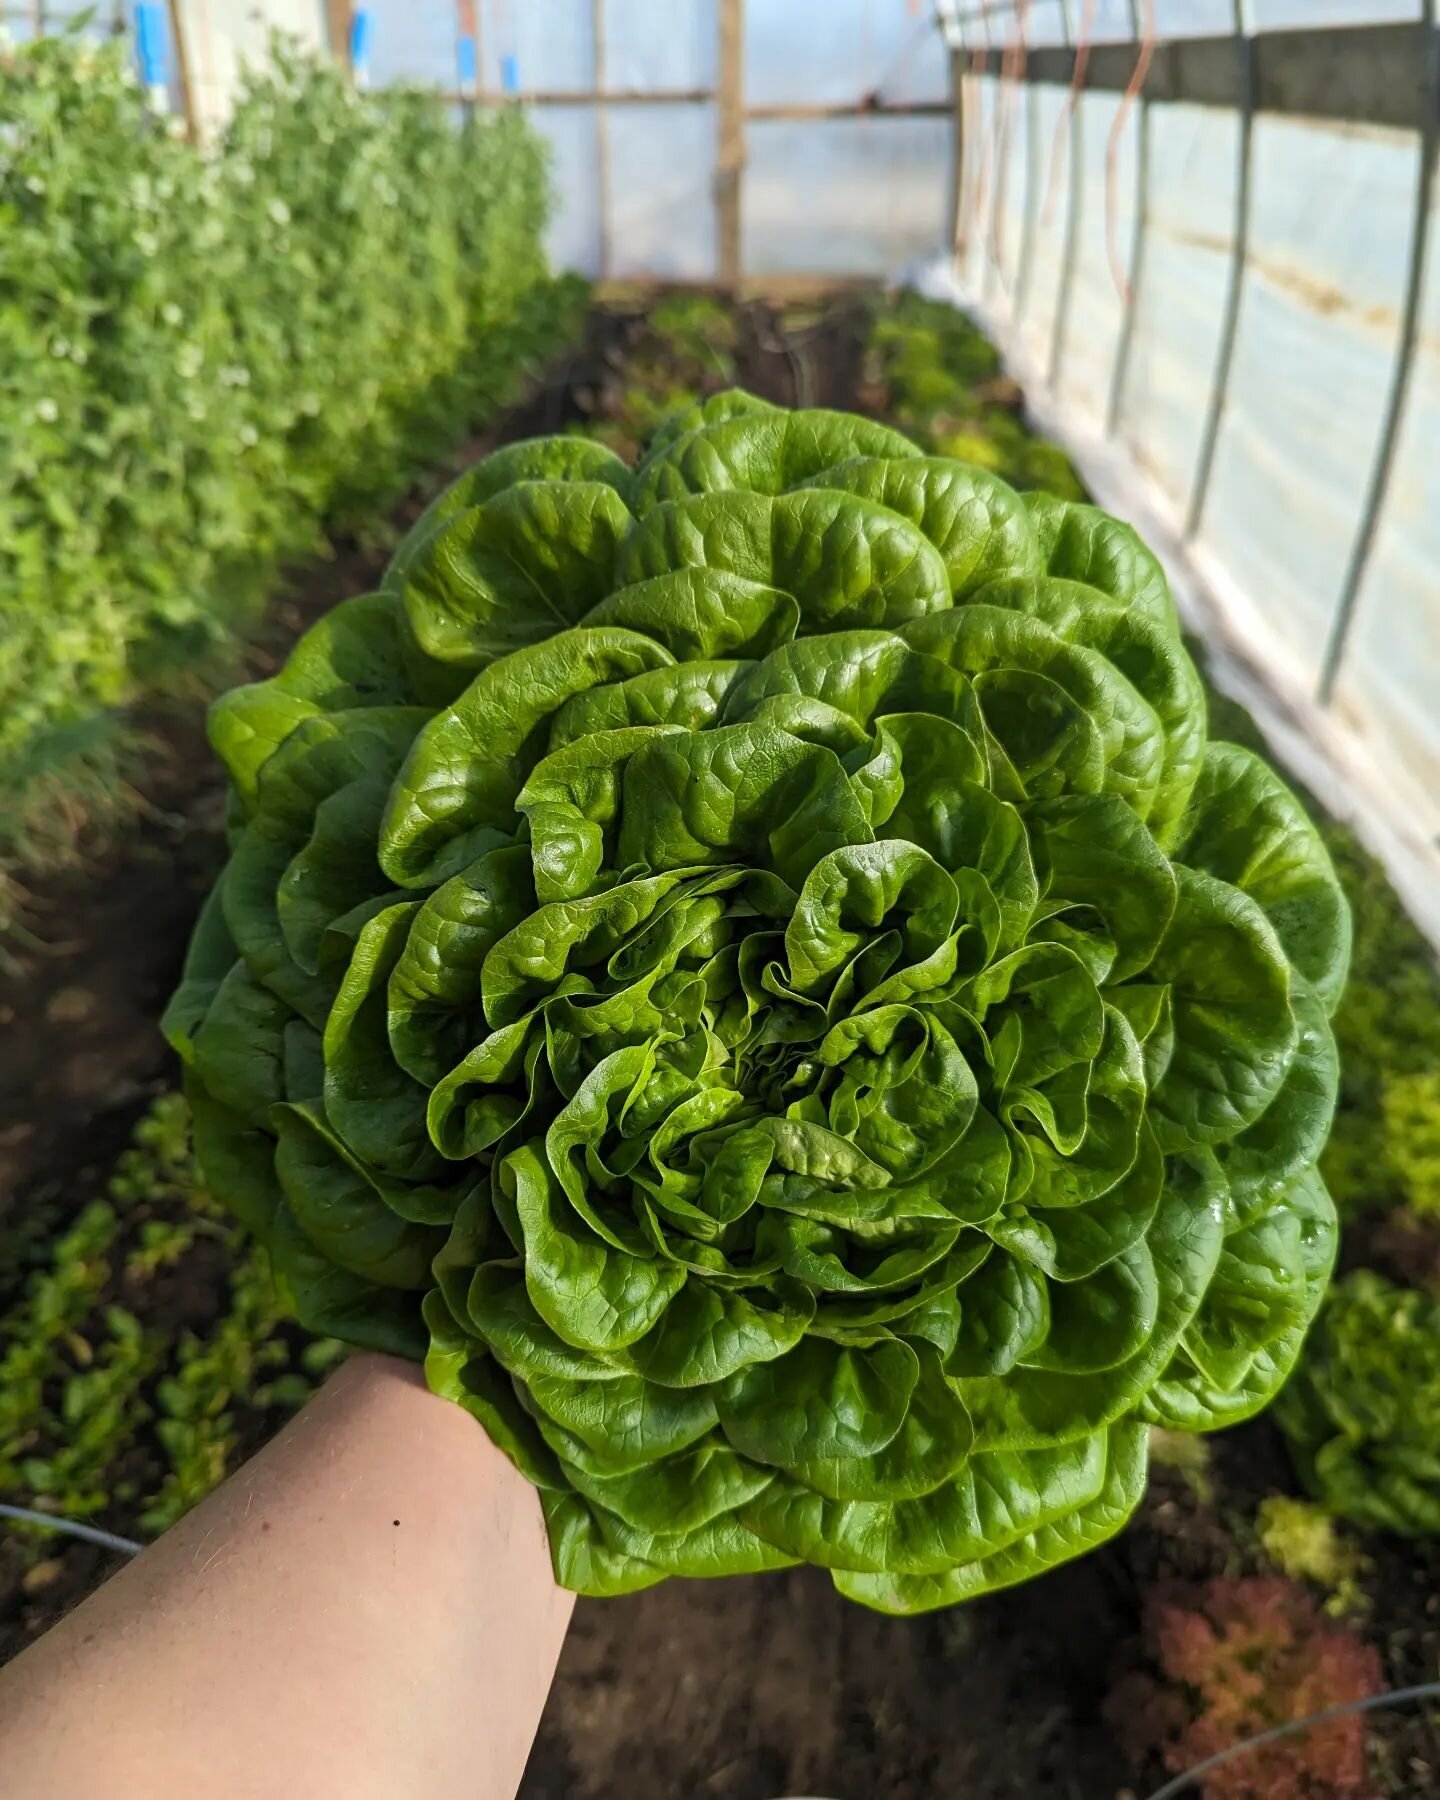 Our winter lettuce is👌🏻